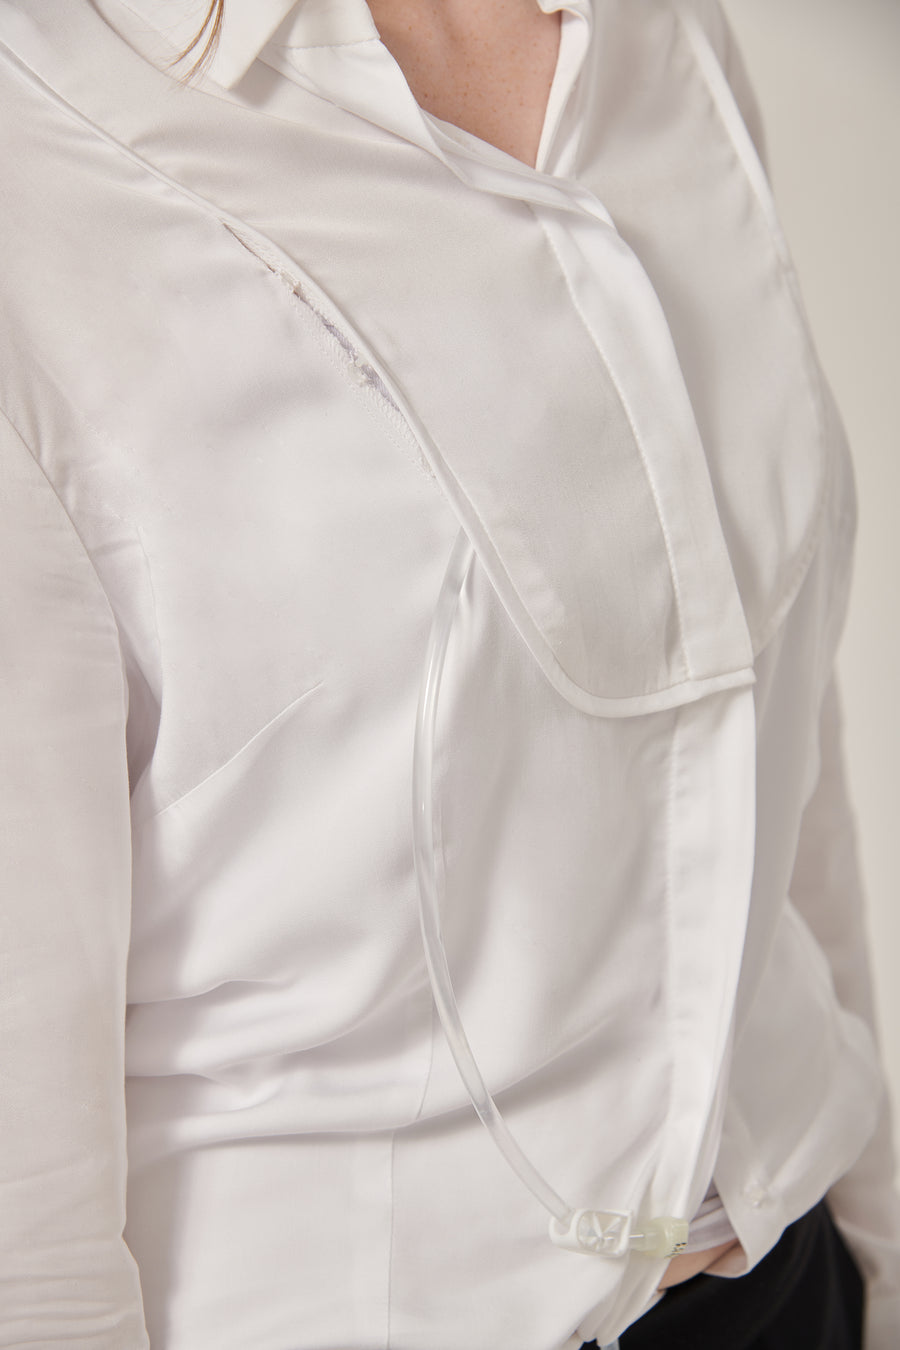 Close up of a woman's white shirt. There is a bib styling detail that conceals a chest opening. A tube comes from the woman's waist and loops back in at the chest.